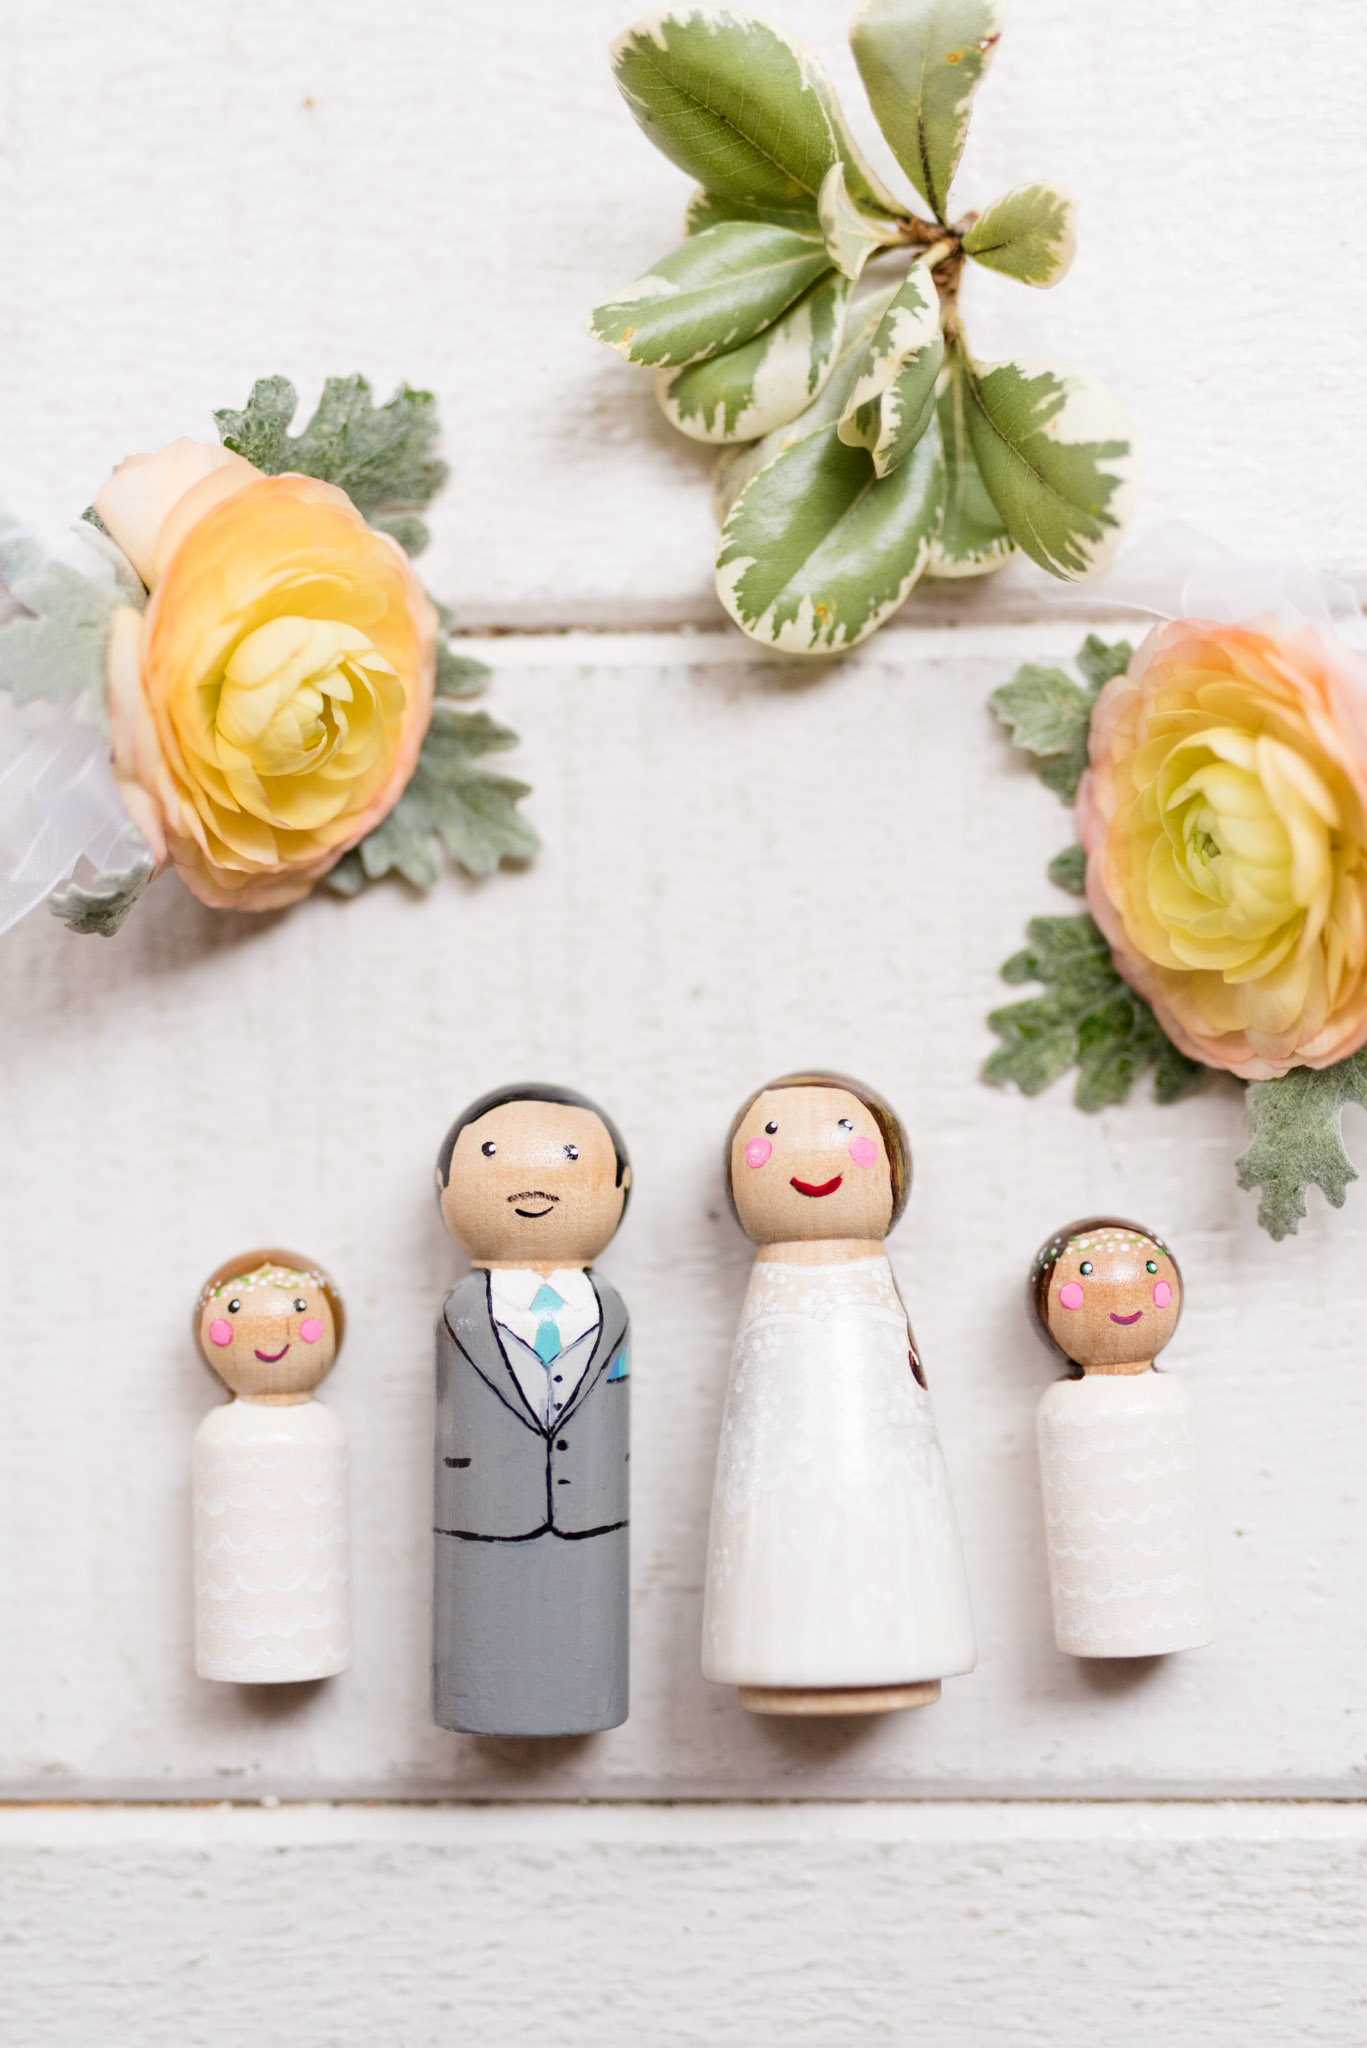 Hand painted cake toppers of the bride and groom.